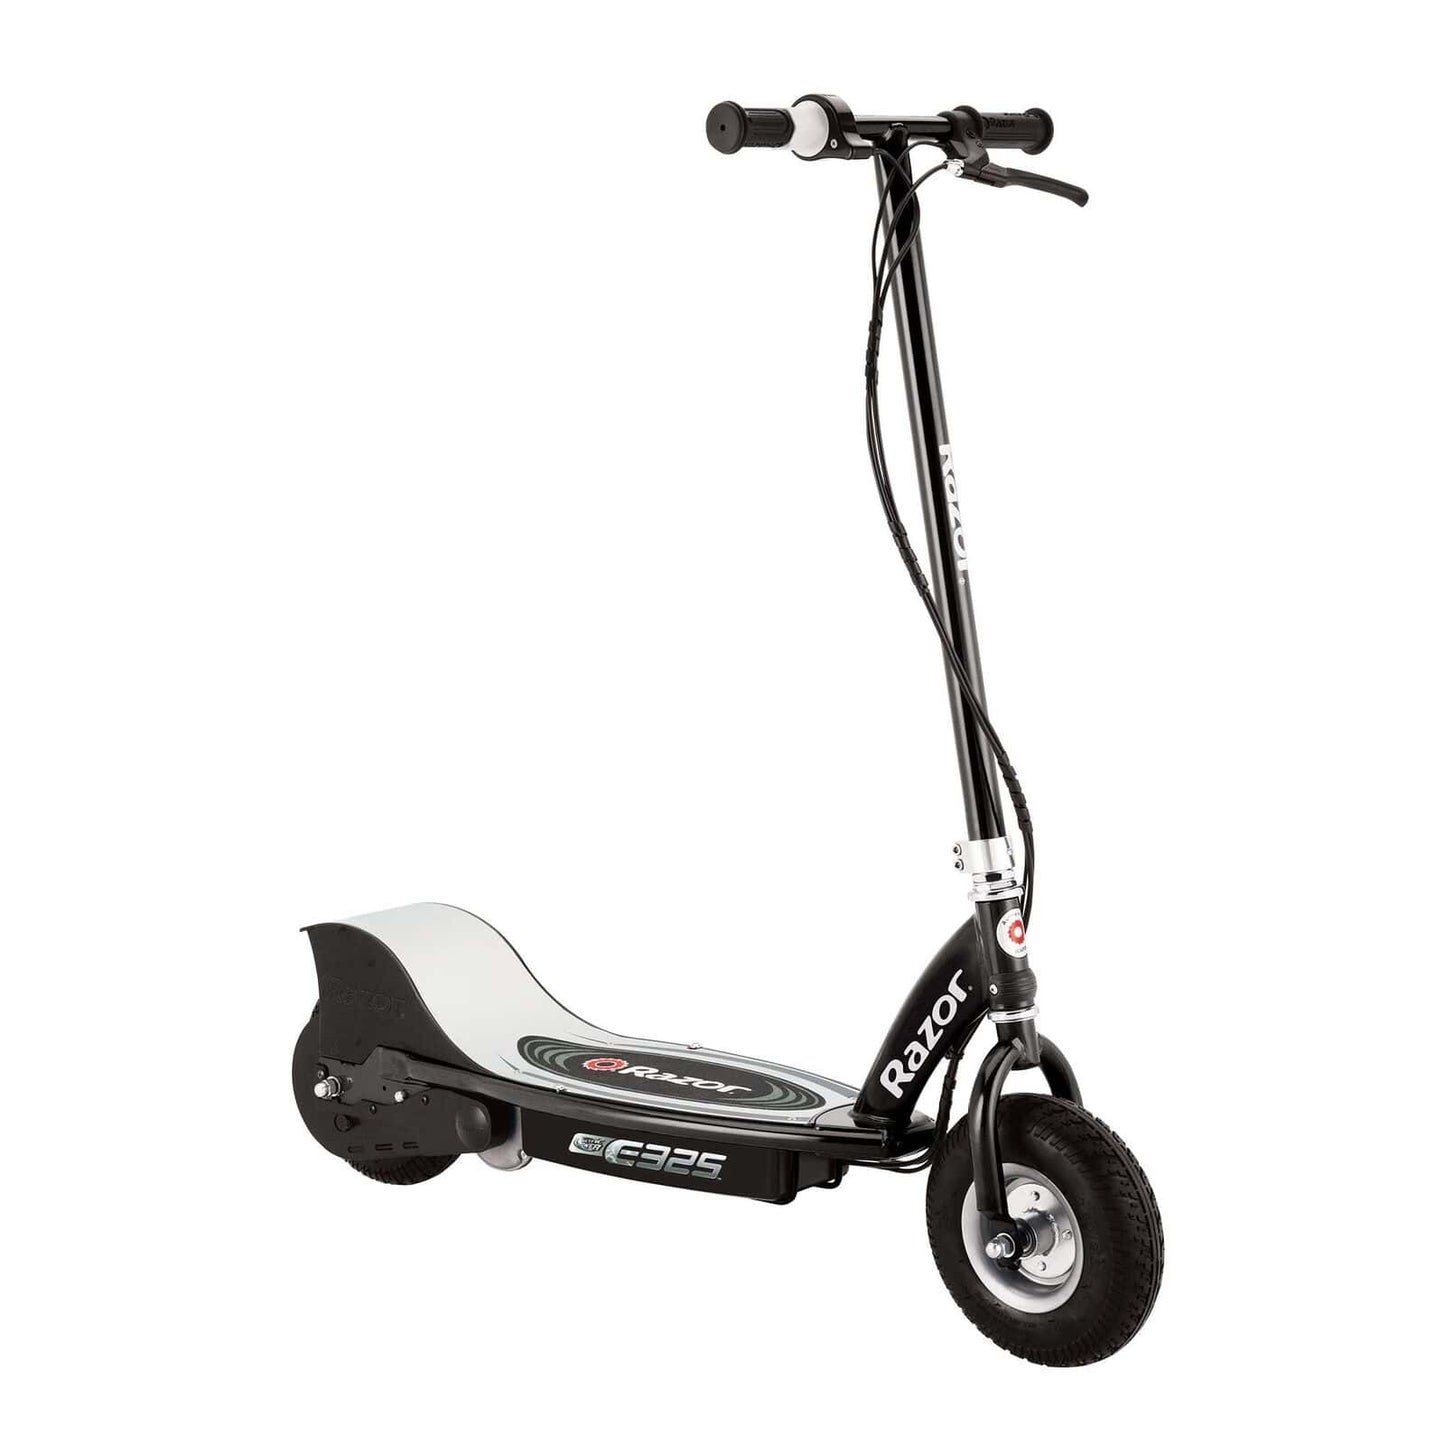 Razor E325 - Adult Ride-On 24V High-Torque Electric Power Motor - Electric Powered Motor Scooter